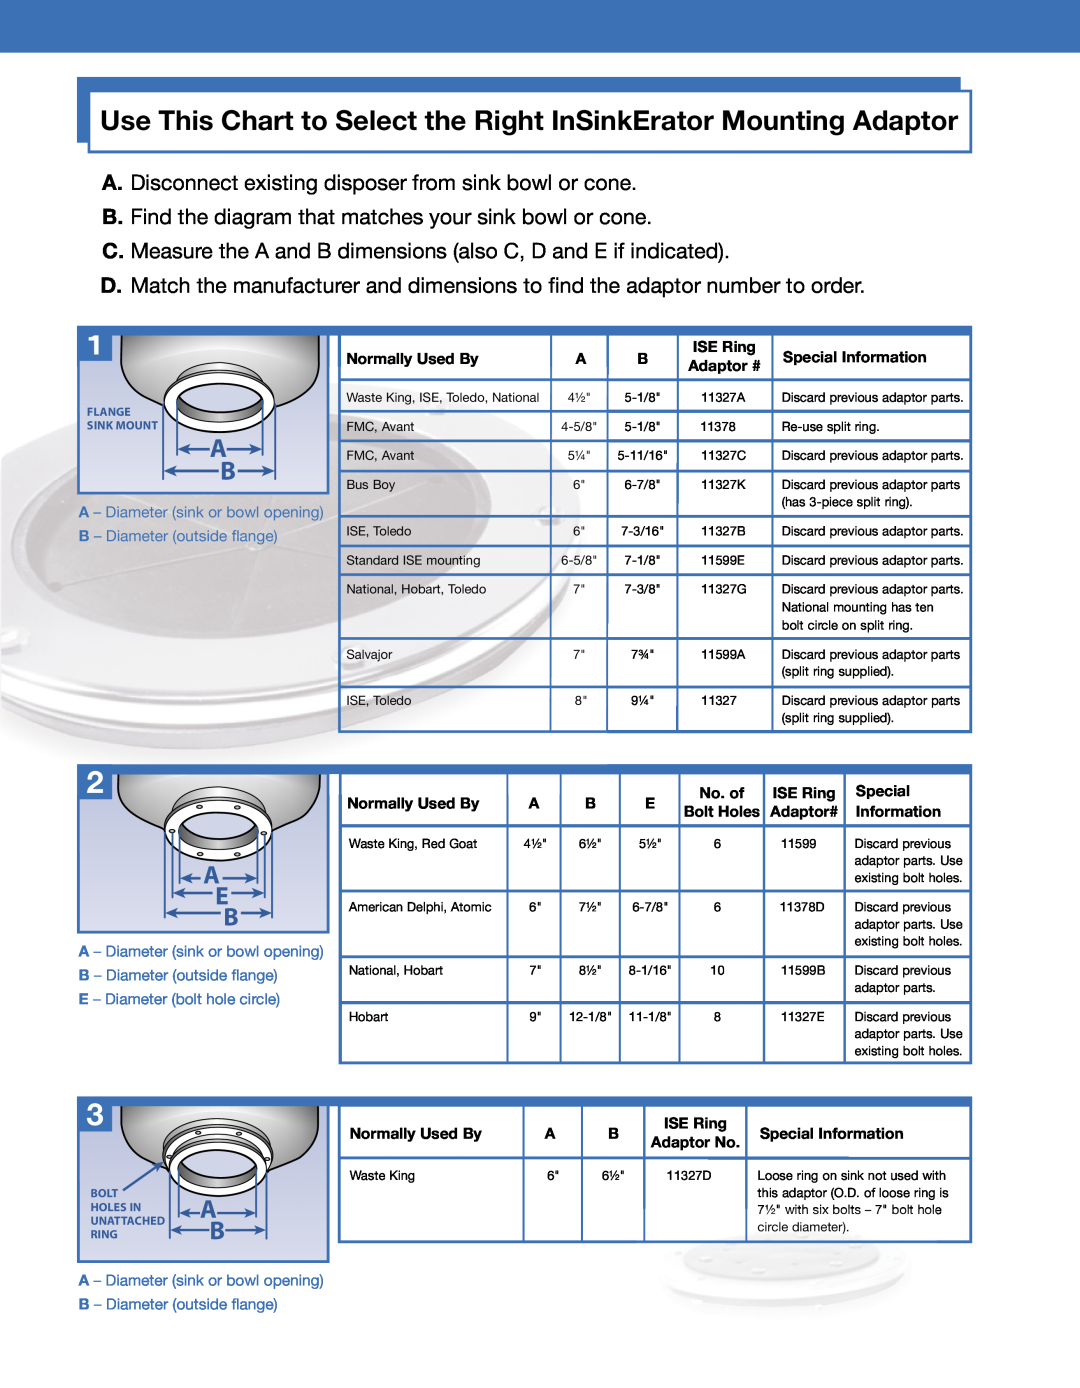 InSinkErator SS-750 manual Use This Chart to Select the Right InSinkErator Mounting Adaptor, E - Diameter bolt hole circle 